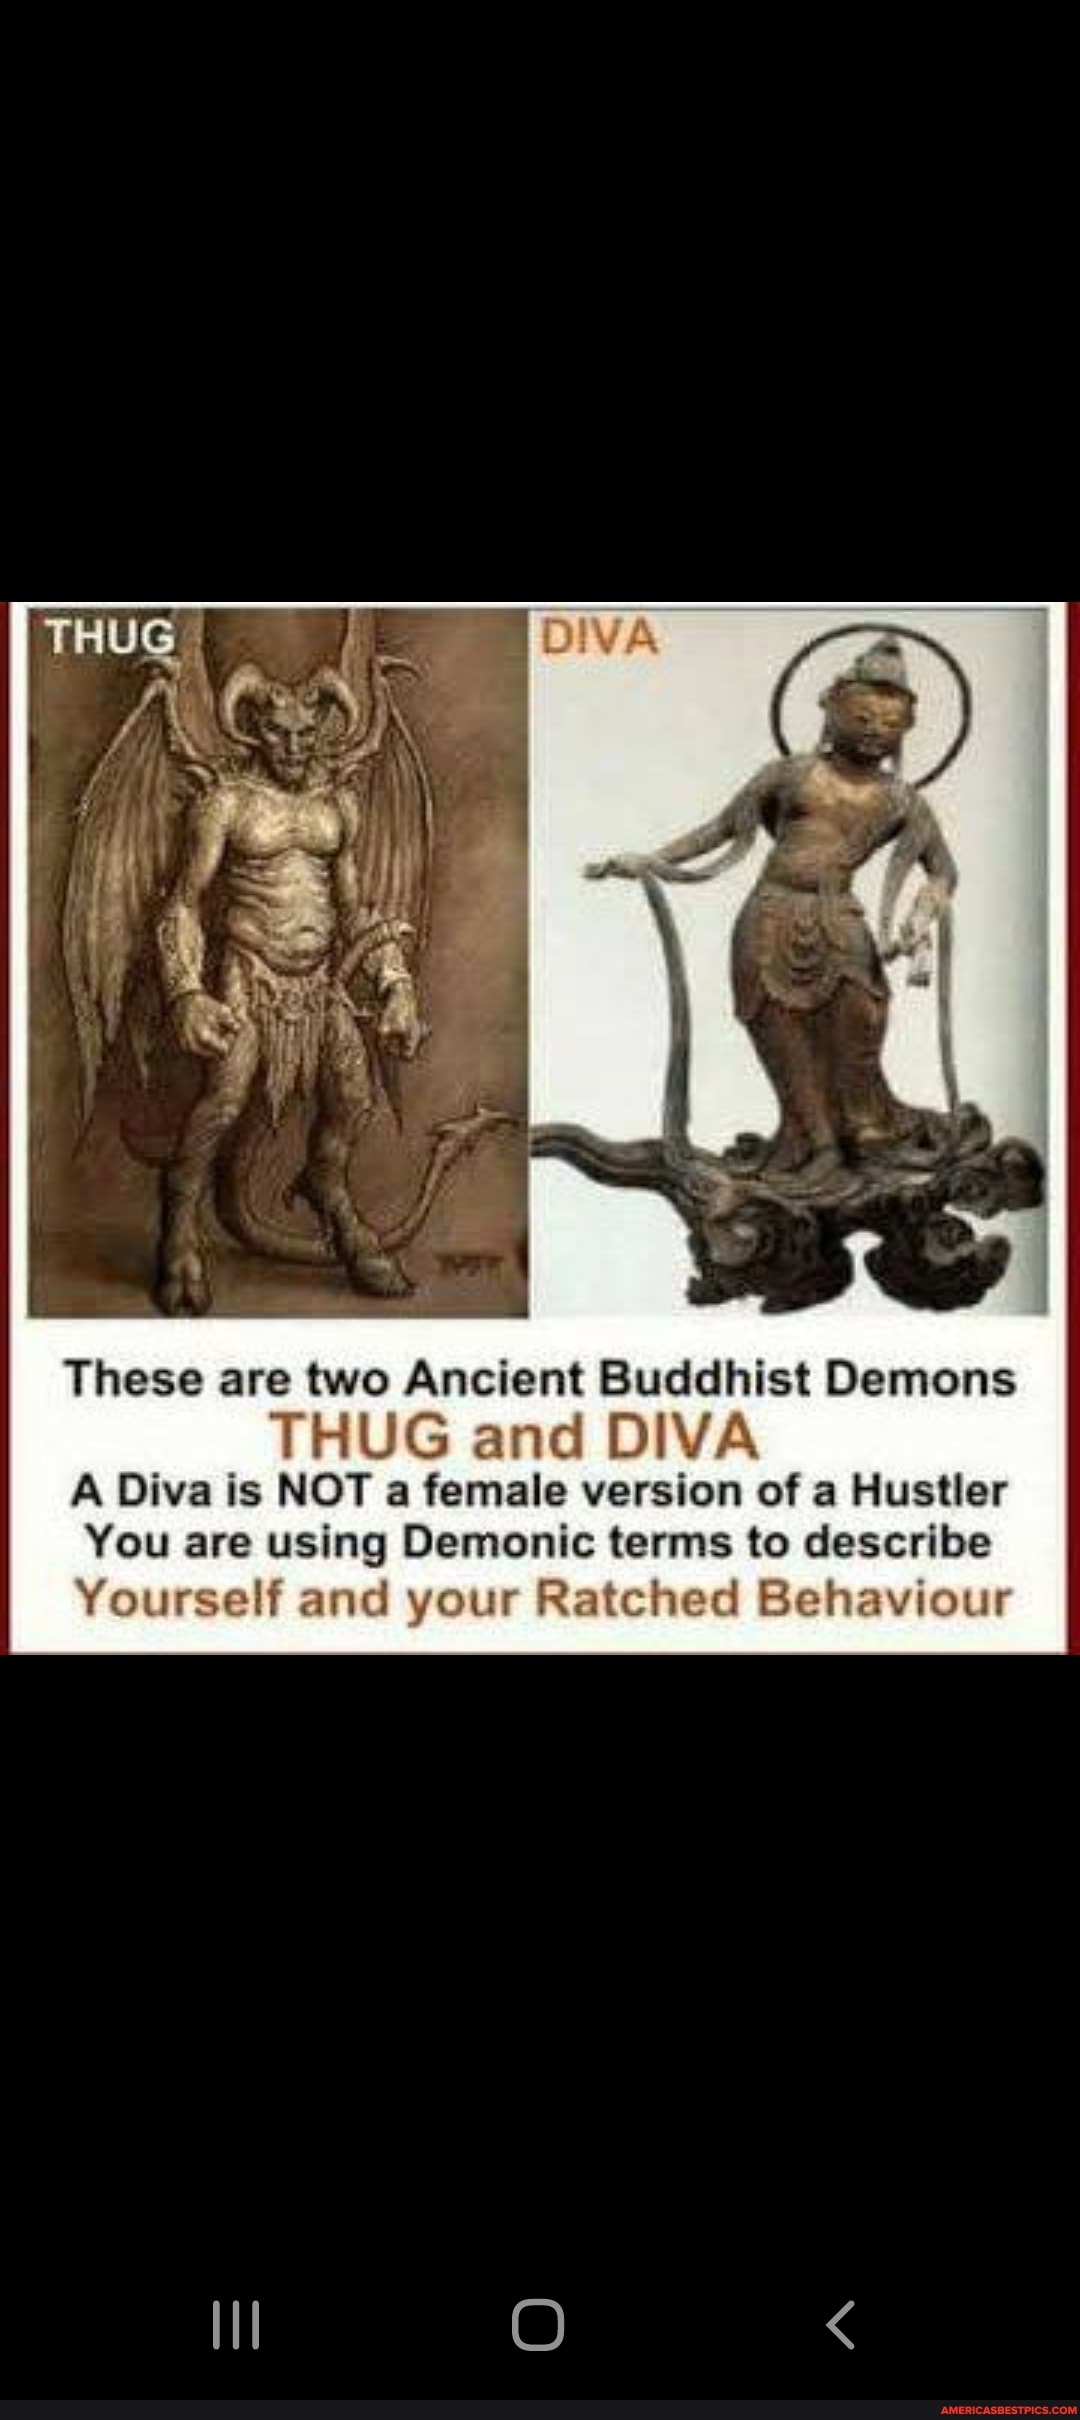 THUG These are two Ancient Buddhist Demons THUG and DIVA A is NOT a female